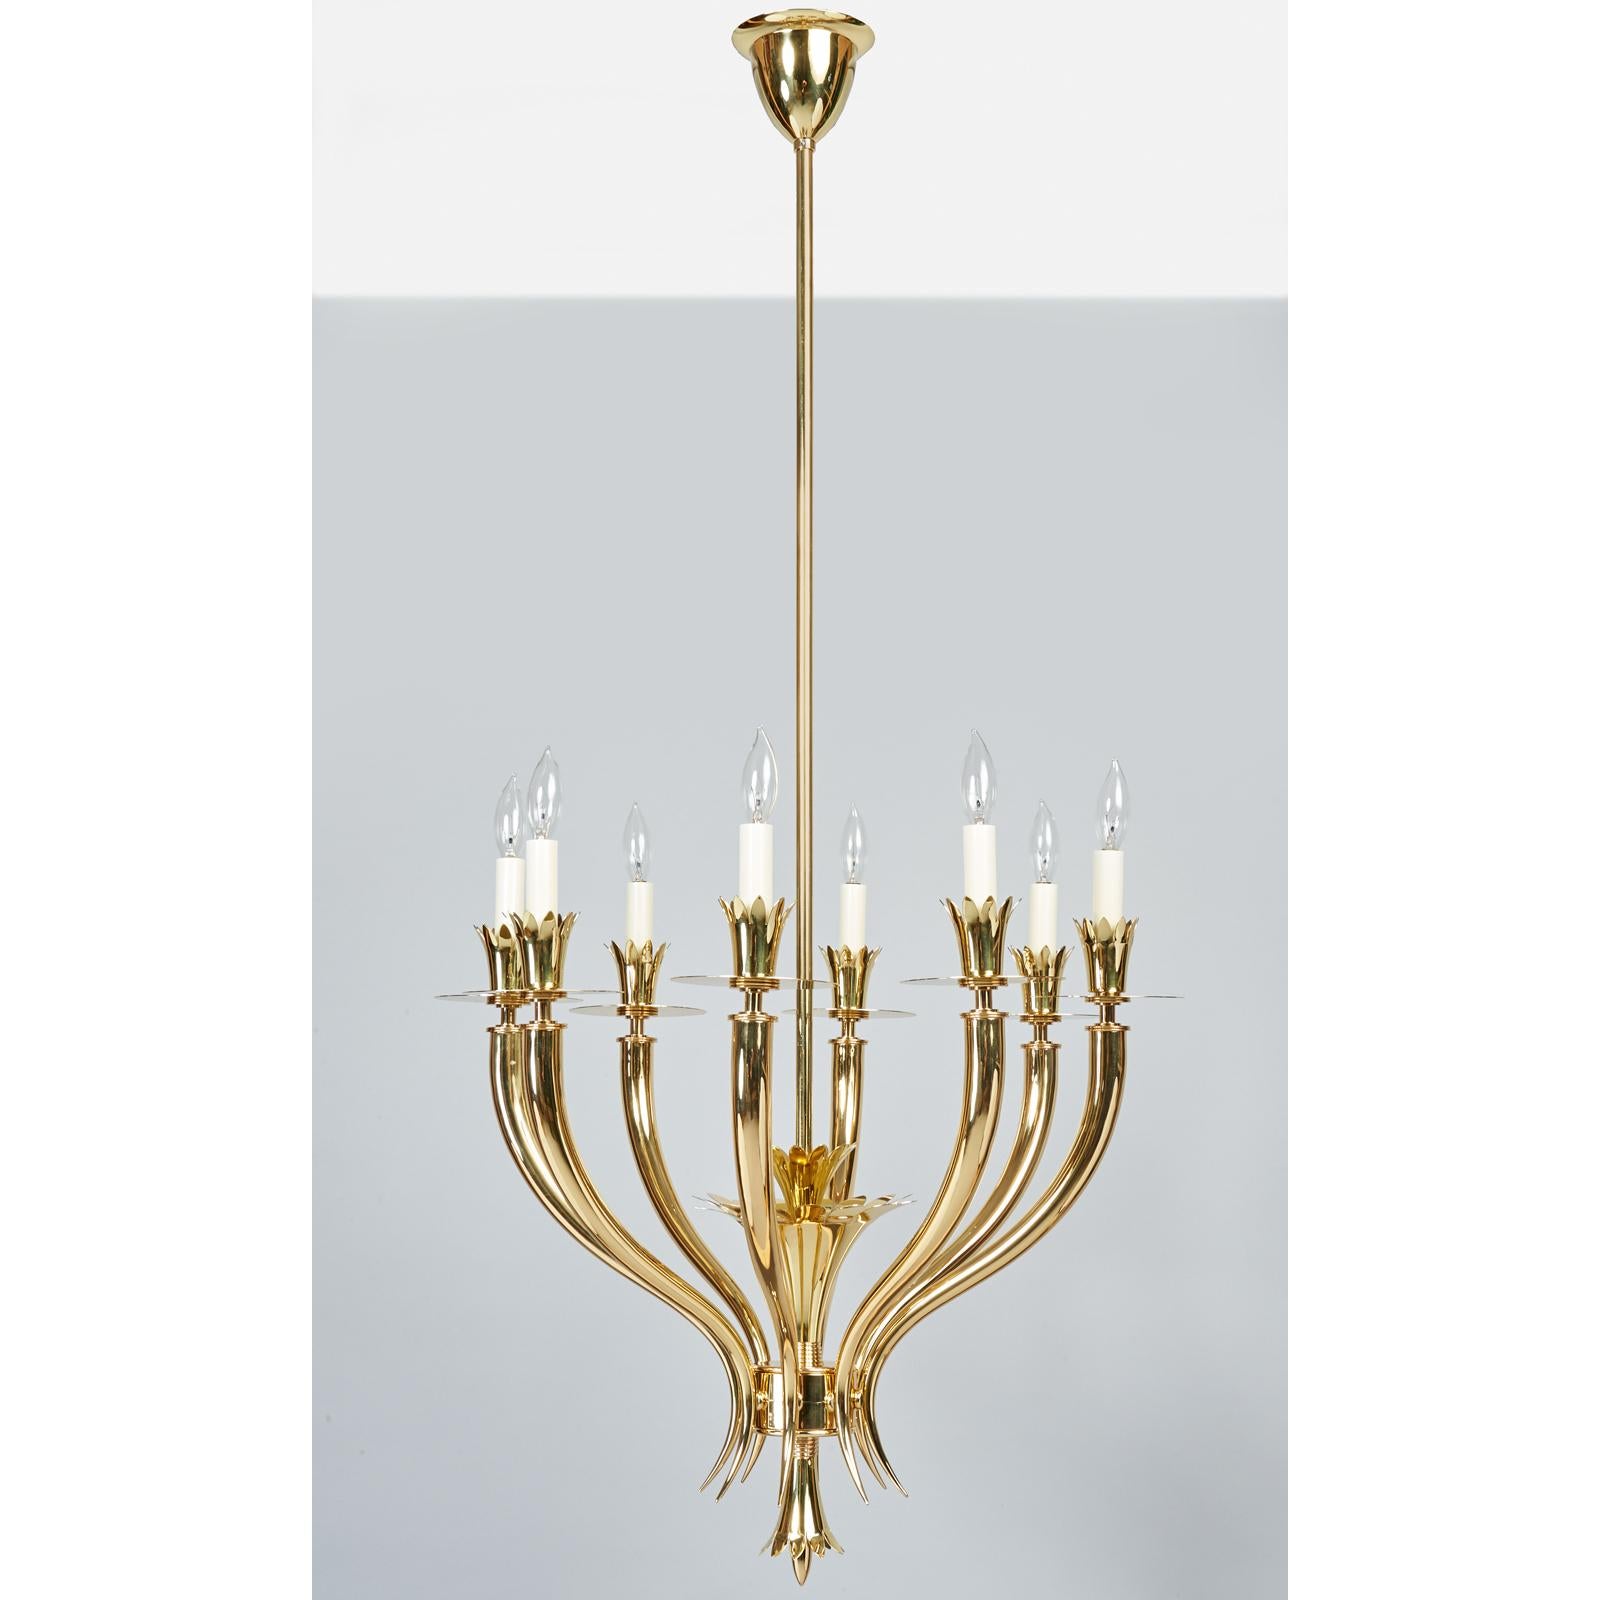 Gio Ponti (1891 - 1979)

An important and exquisitely rendered chandelier in mirror-polished brass by Gio Ponti and Emilio Lancia. With a refined and purified tiered foliate decor, eight serpentine arms tapering to fine curved points, and angular